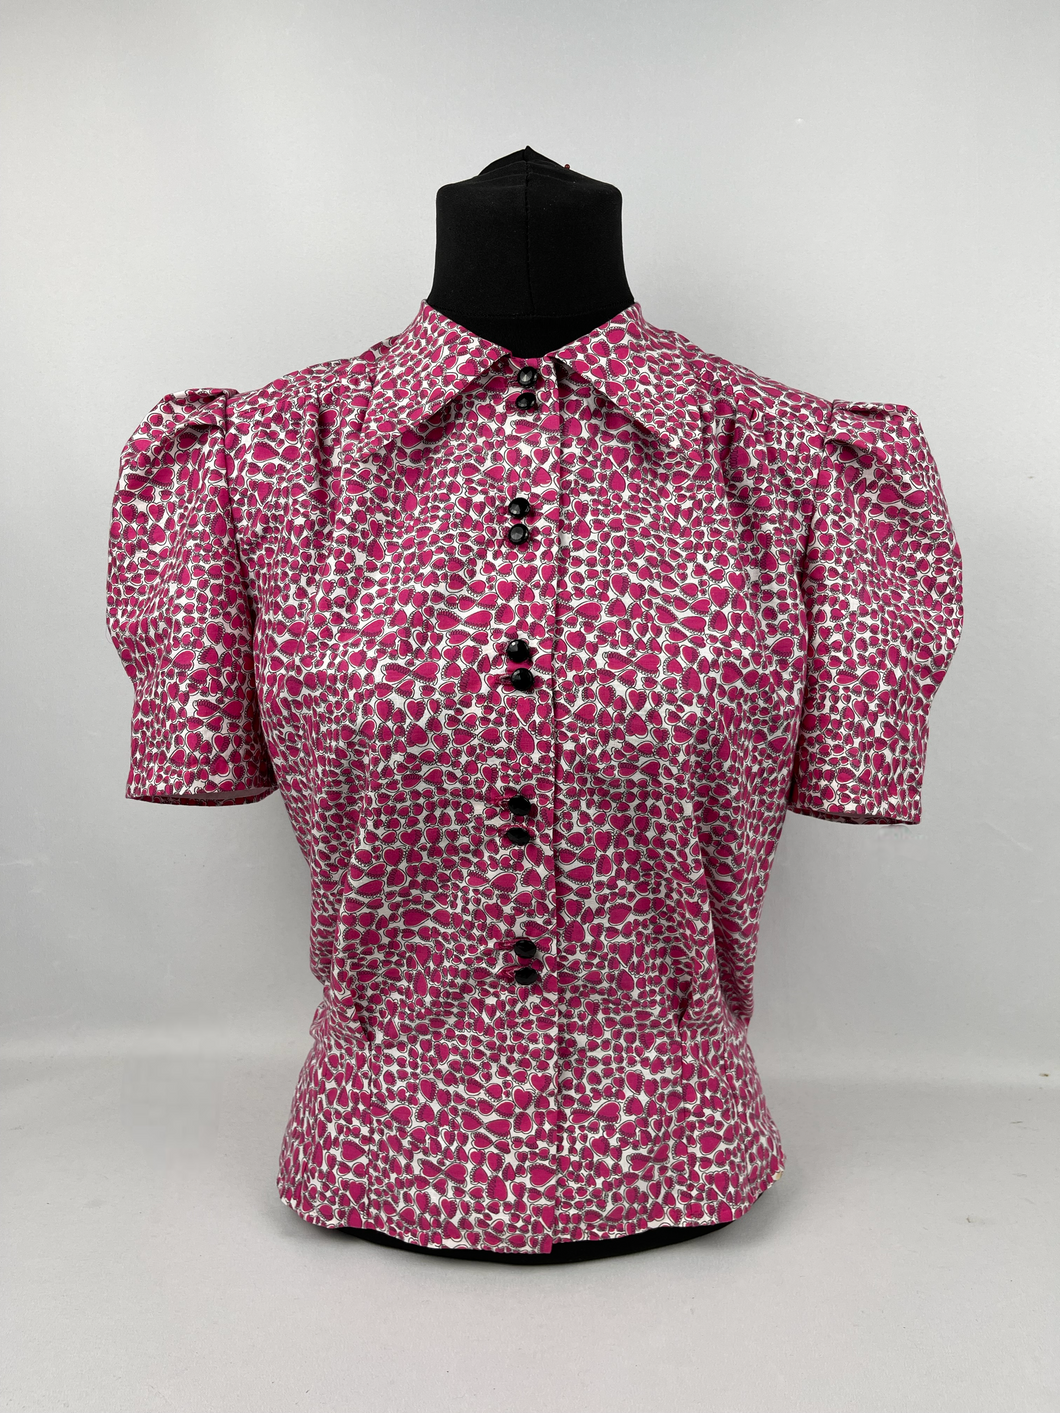 1940's Reproduction Novelty Print Cotton Blouse with Valentine Heart Print - Bust 34